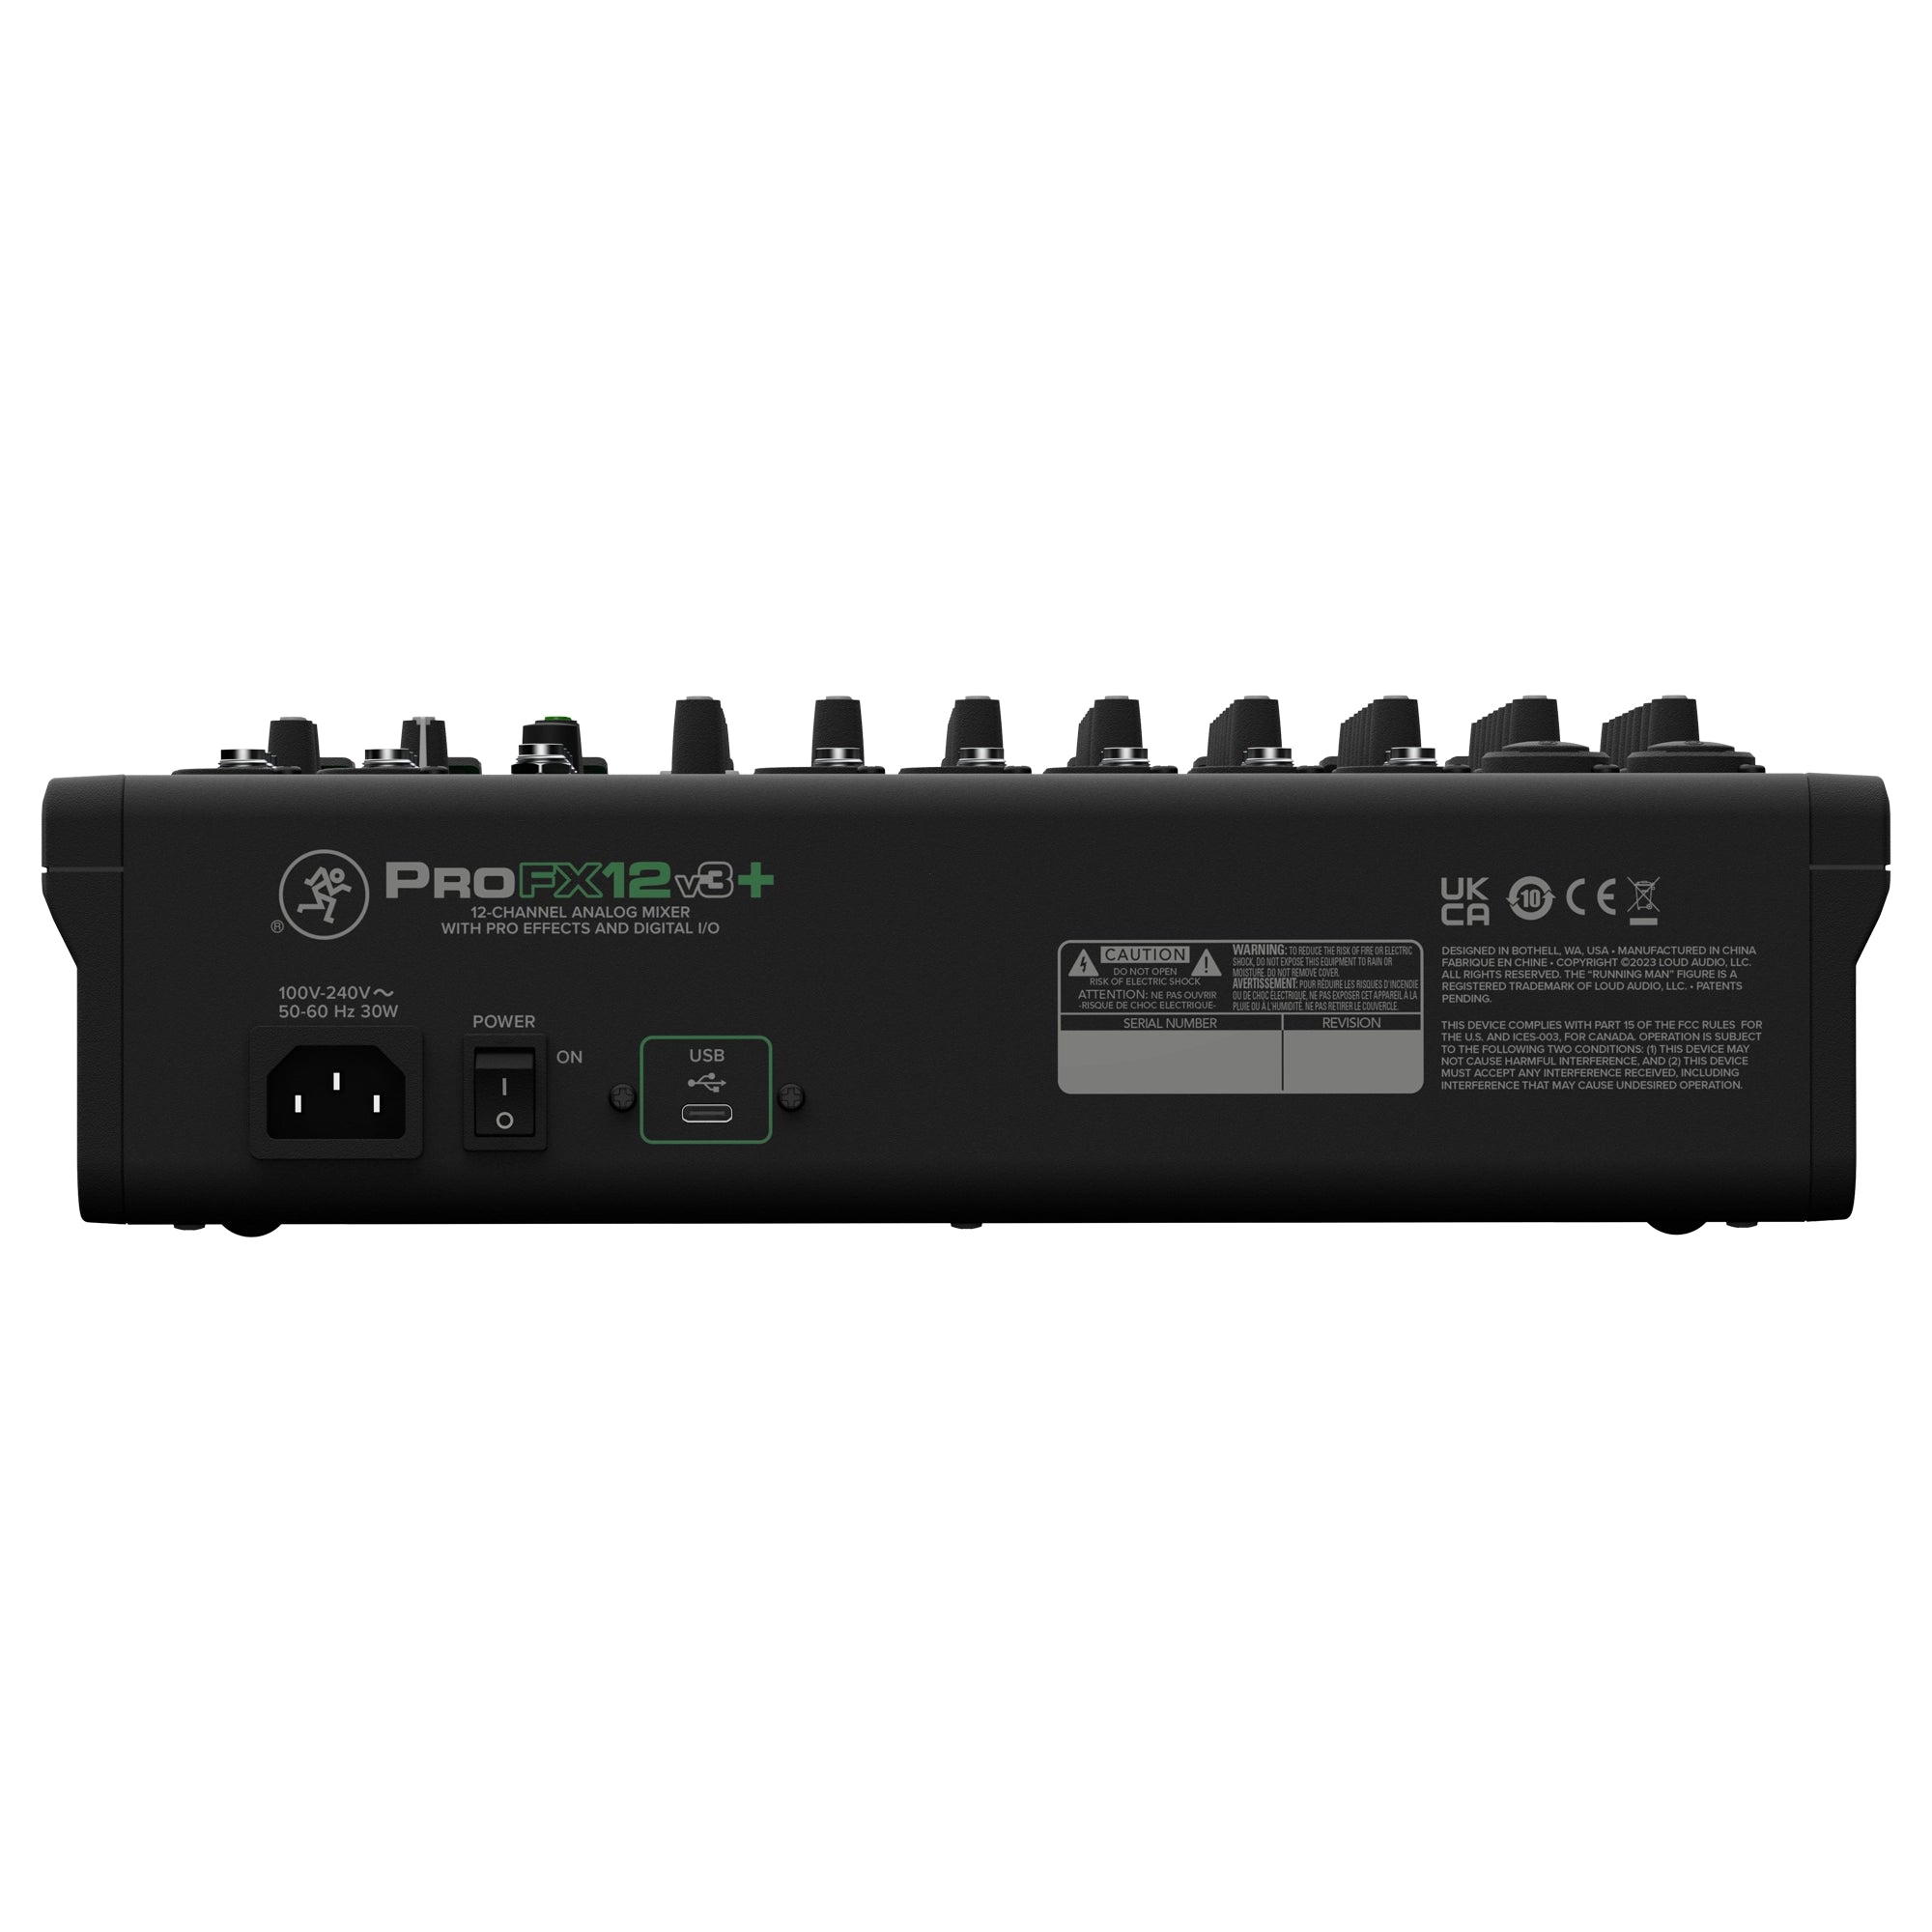 Mackie Profx12v3+ 12-Channel Mixer